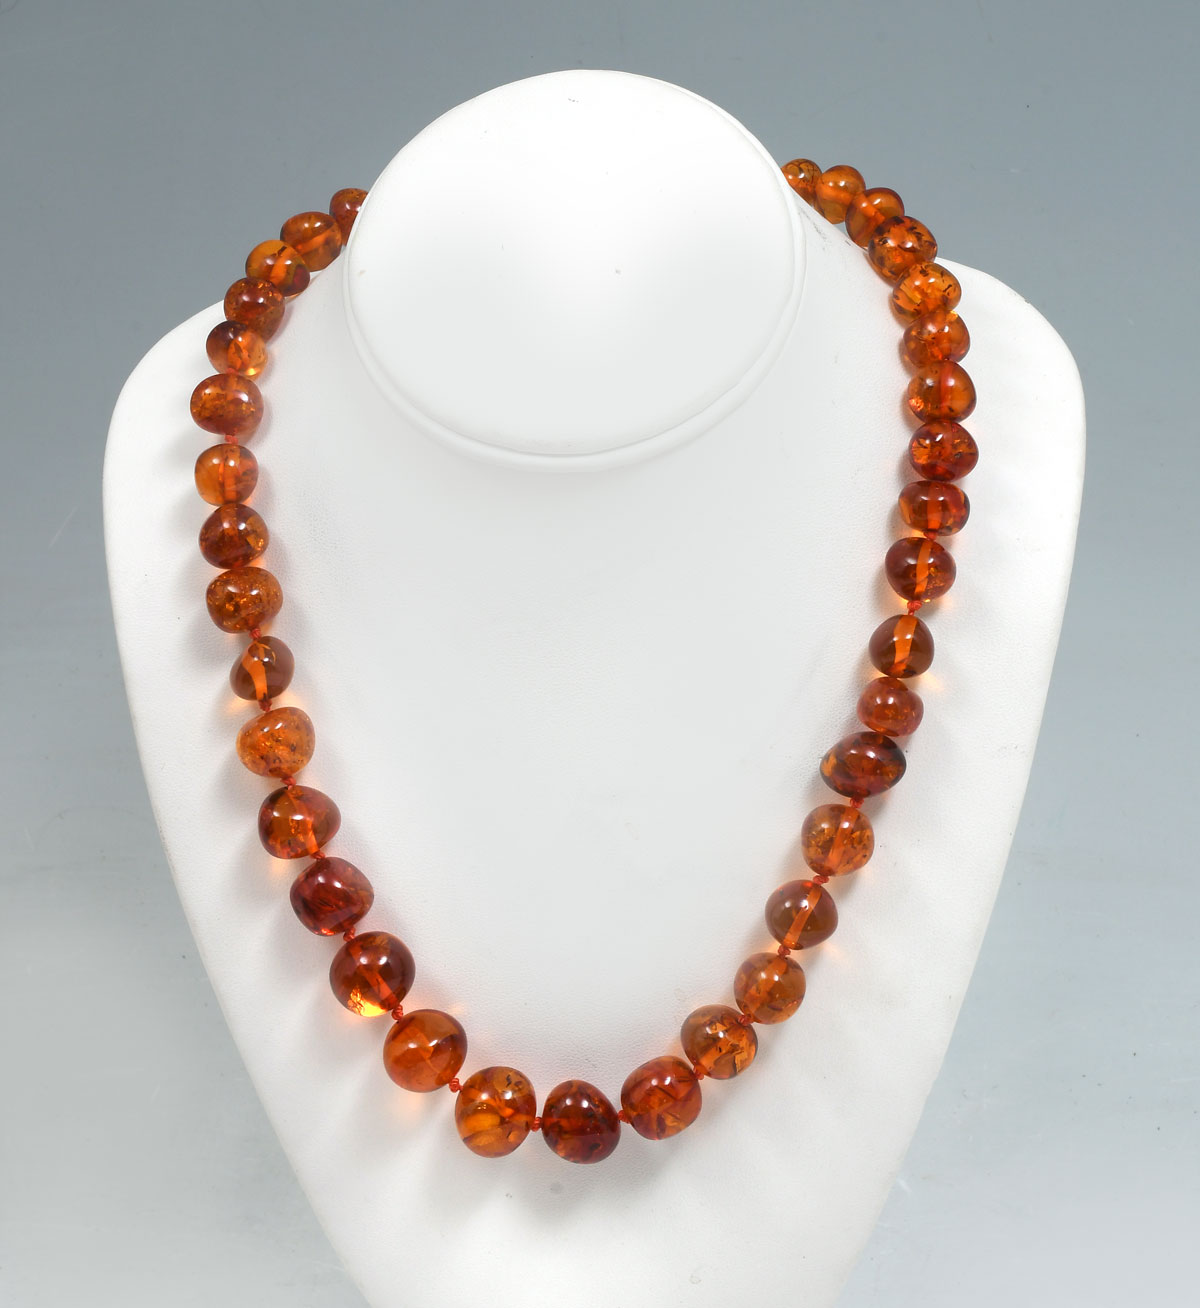 RUSSIAN BALTIC AMBER BEAD NECKLACE: